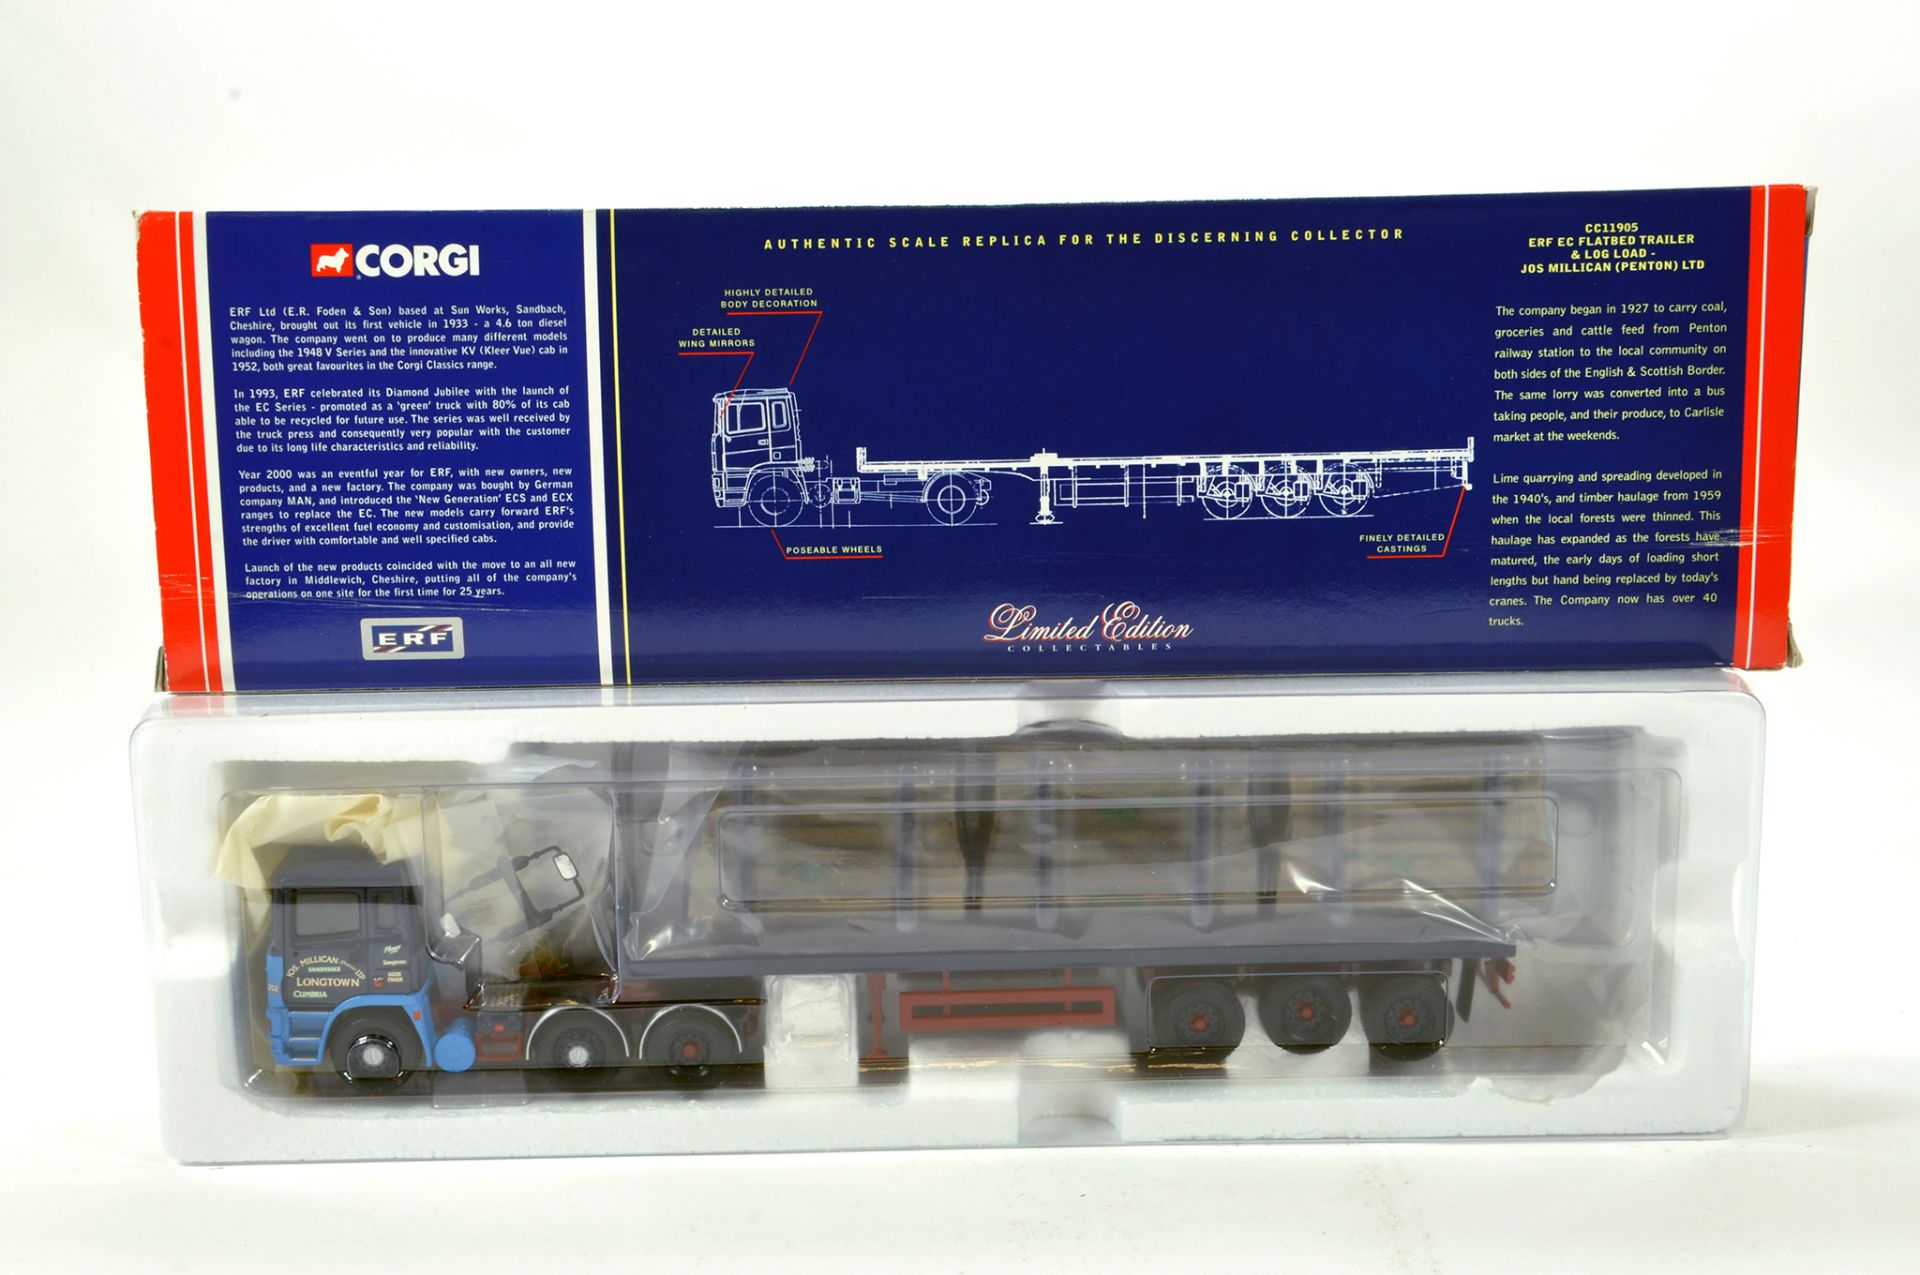 Corgi 1/50 diecast truck issue comprising No. CC11905 ERF EC Flatbed Trailer and Log Load in